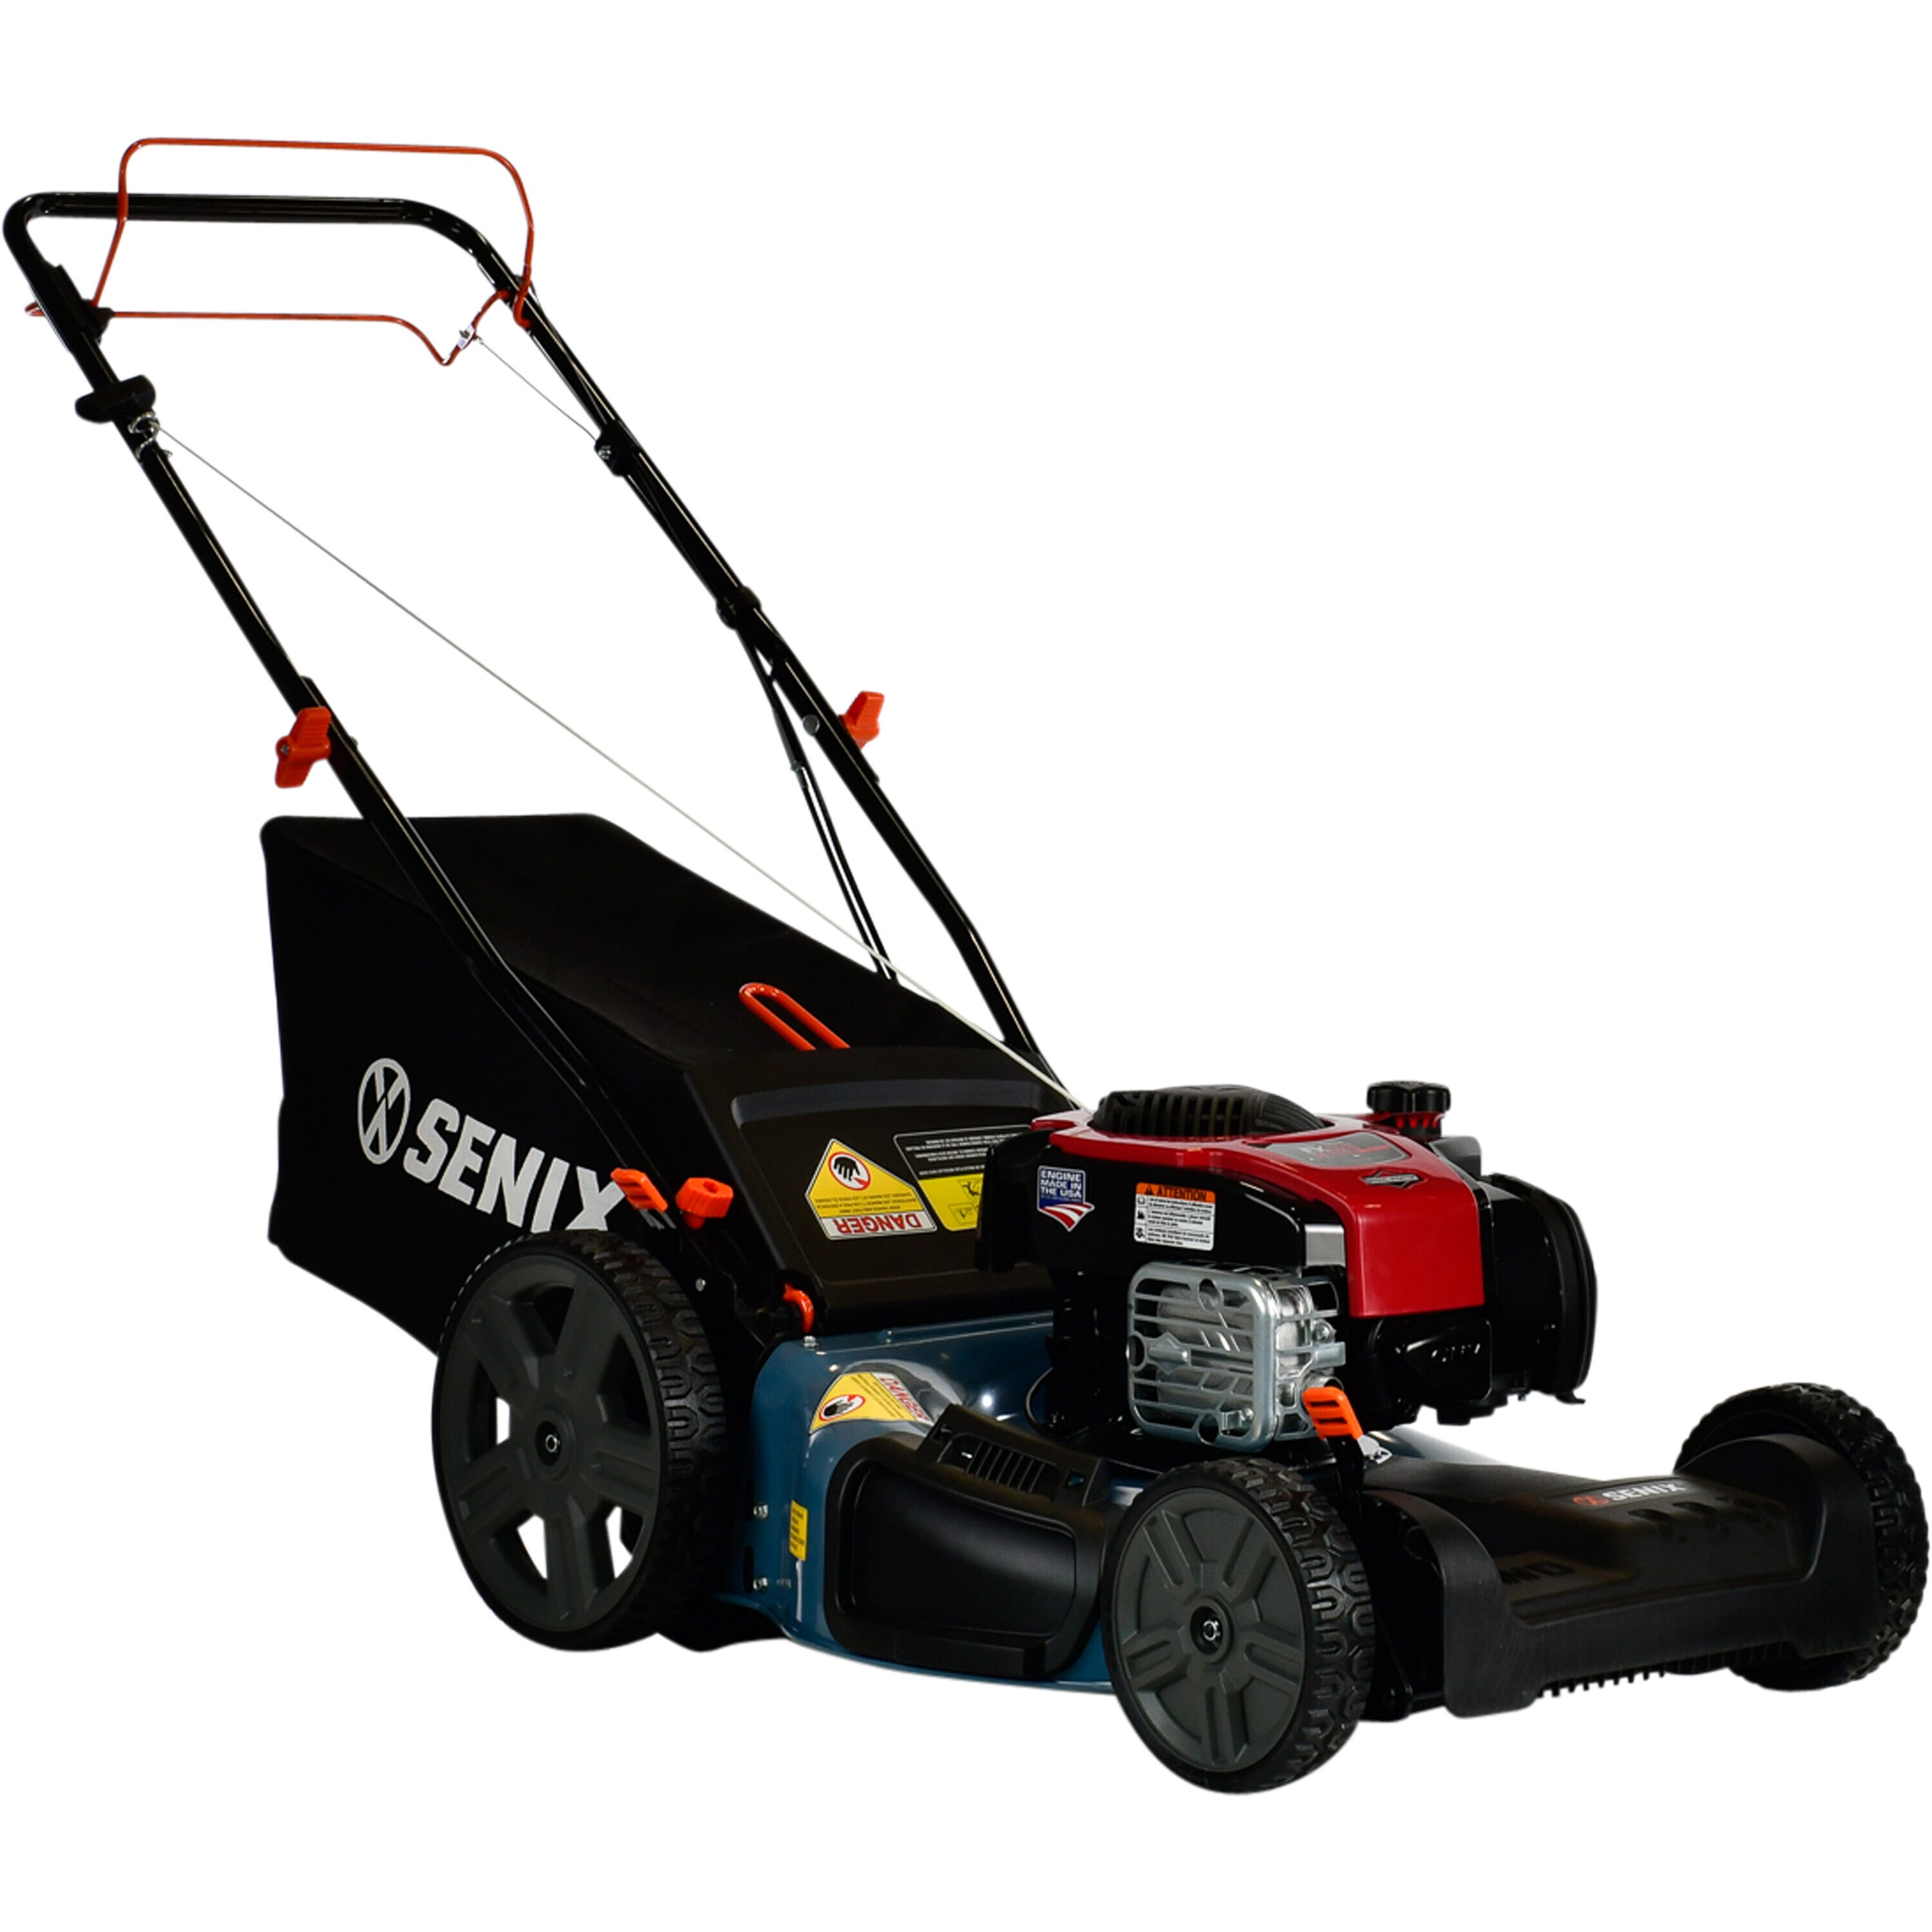 SENIX 21-in Gas Self-propelled Lawn Mower with 150-cc Briggs and 